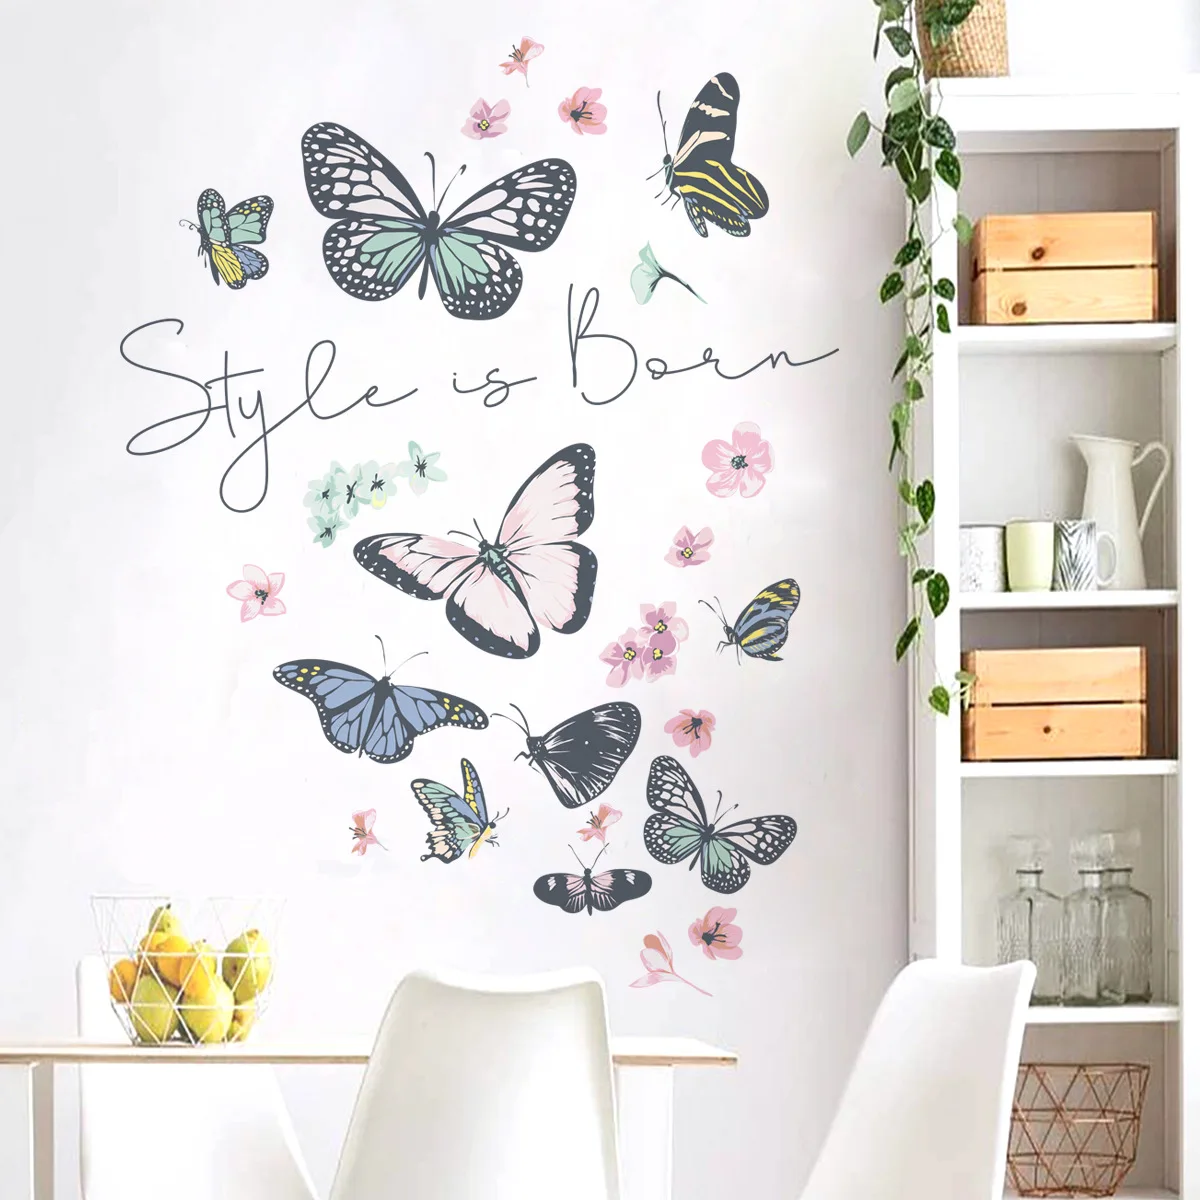 30*90cm Color Butterfly English Style Floral Wall Stickers Living Room Bedroom Background Decorative Mural Wall Sticker Ms574 90cm usb 2 0 to type c charge data transfer coiled cable for samsung galaxy c9 pro huawei mate 9 silver color